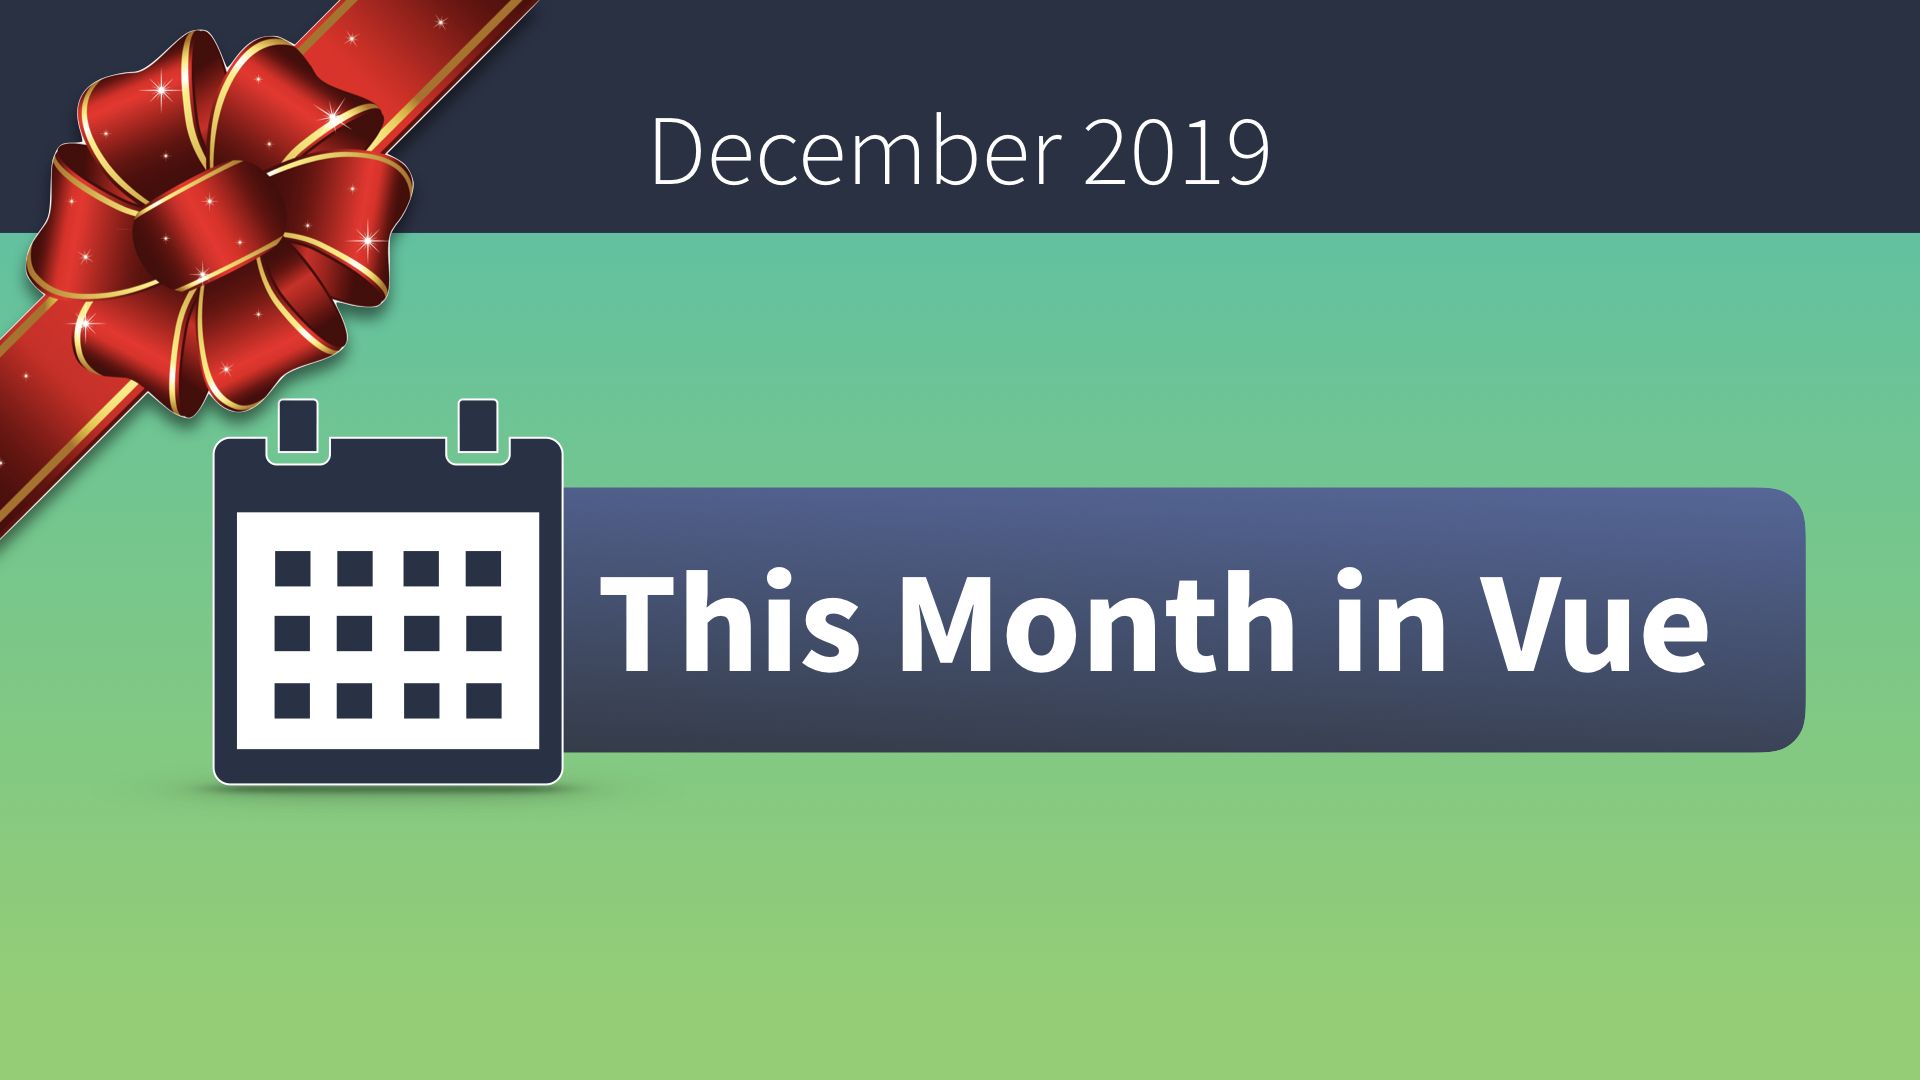 This Month in Vue - December 2019